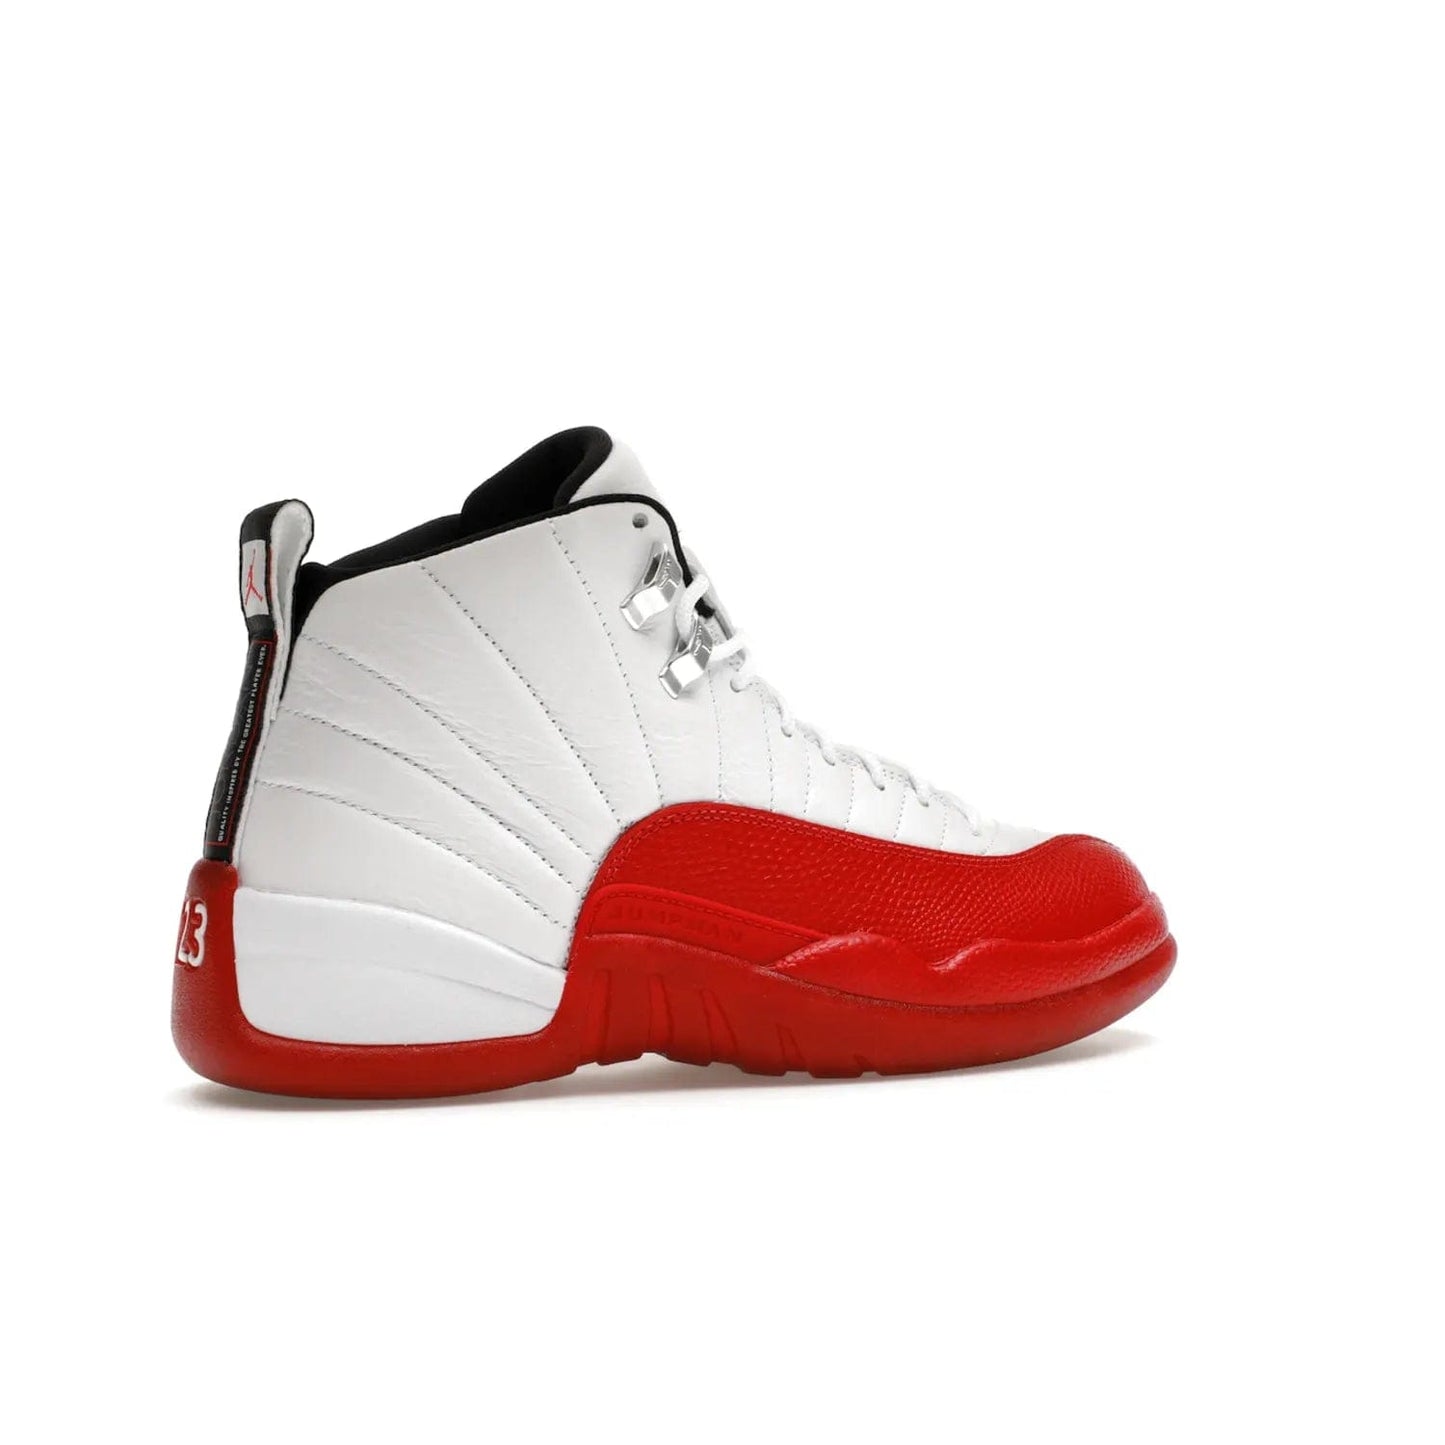 Jordan 12 Retro Cherry (2023) - Image 34 - Only at www.BallersClubKickz.com - Live your sneaker legend with the Jordan 12 Retro Cherry. Iconic pebbled leather mudguards, quilted uppers, and varsity red accents make this 1997 classic a must-have for 2023. Shine on with silver hardware and matching midsoles, and bring it all together for limited-edition style on October 28th. Step into Jordan legacy with the Retro Cherry.